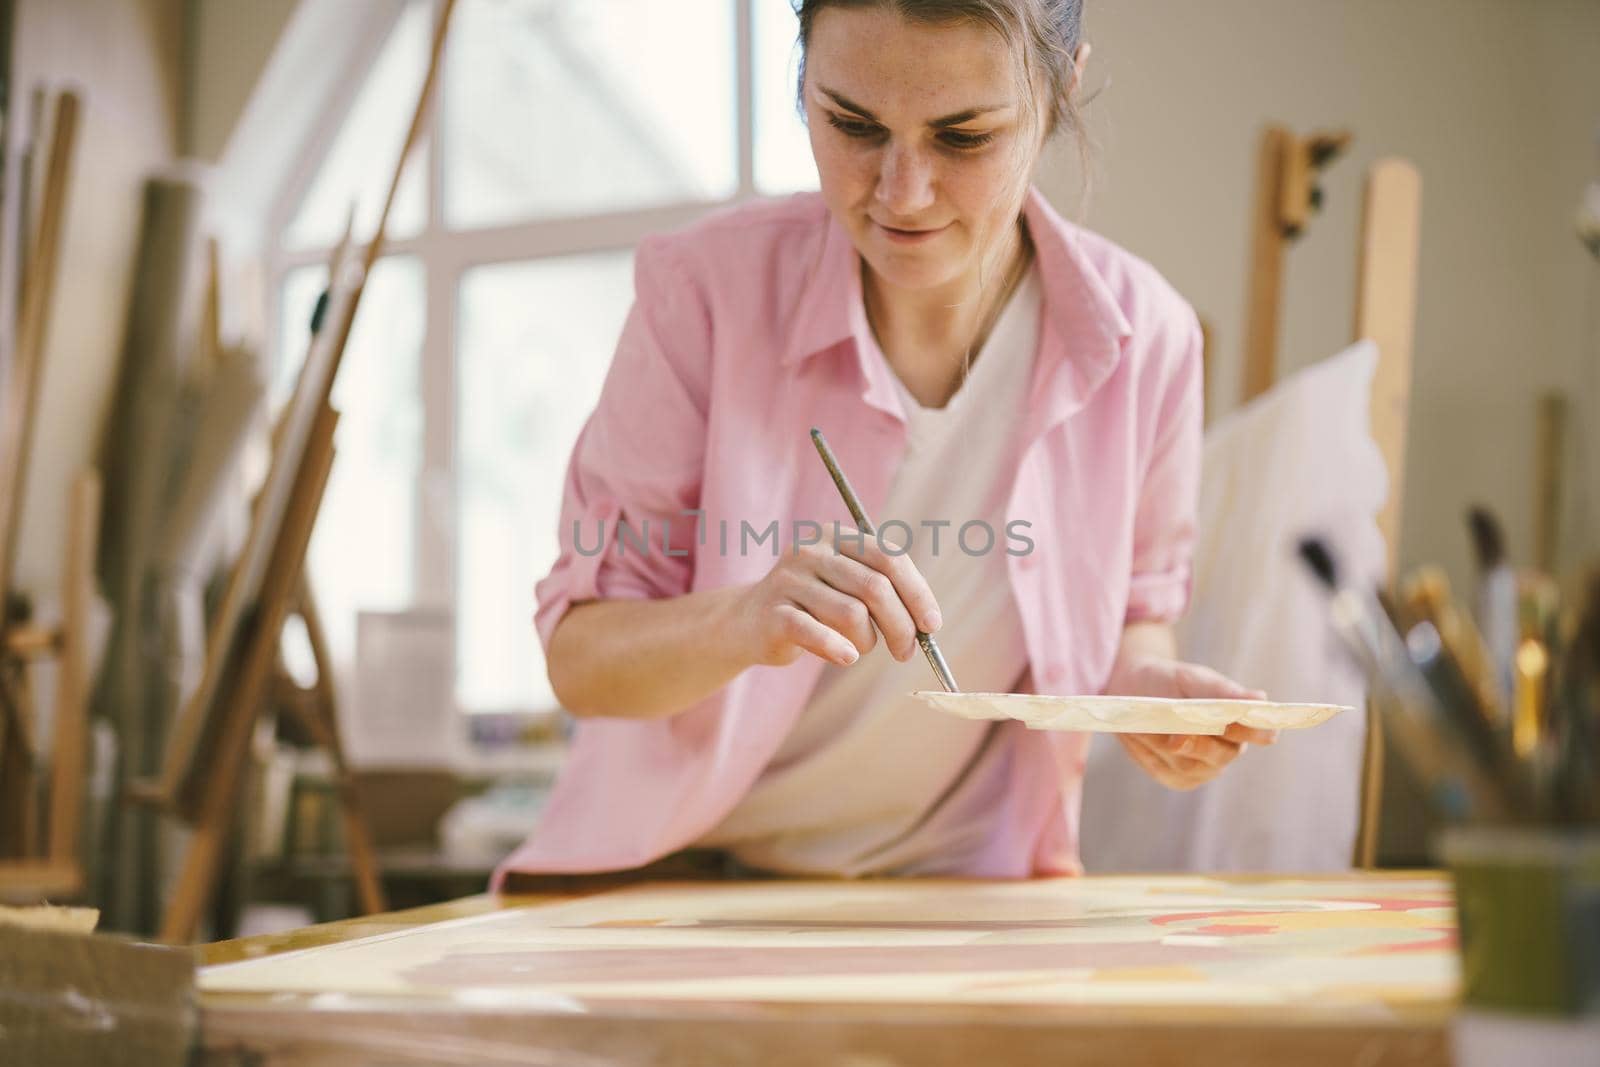 Cute woman paints on canvas in an art workshop. Artist creating picture. Art school or studio. Work with paints, brushes and easel. Hobby and leisure concept. Woman painter at workspace by Tomashevska